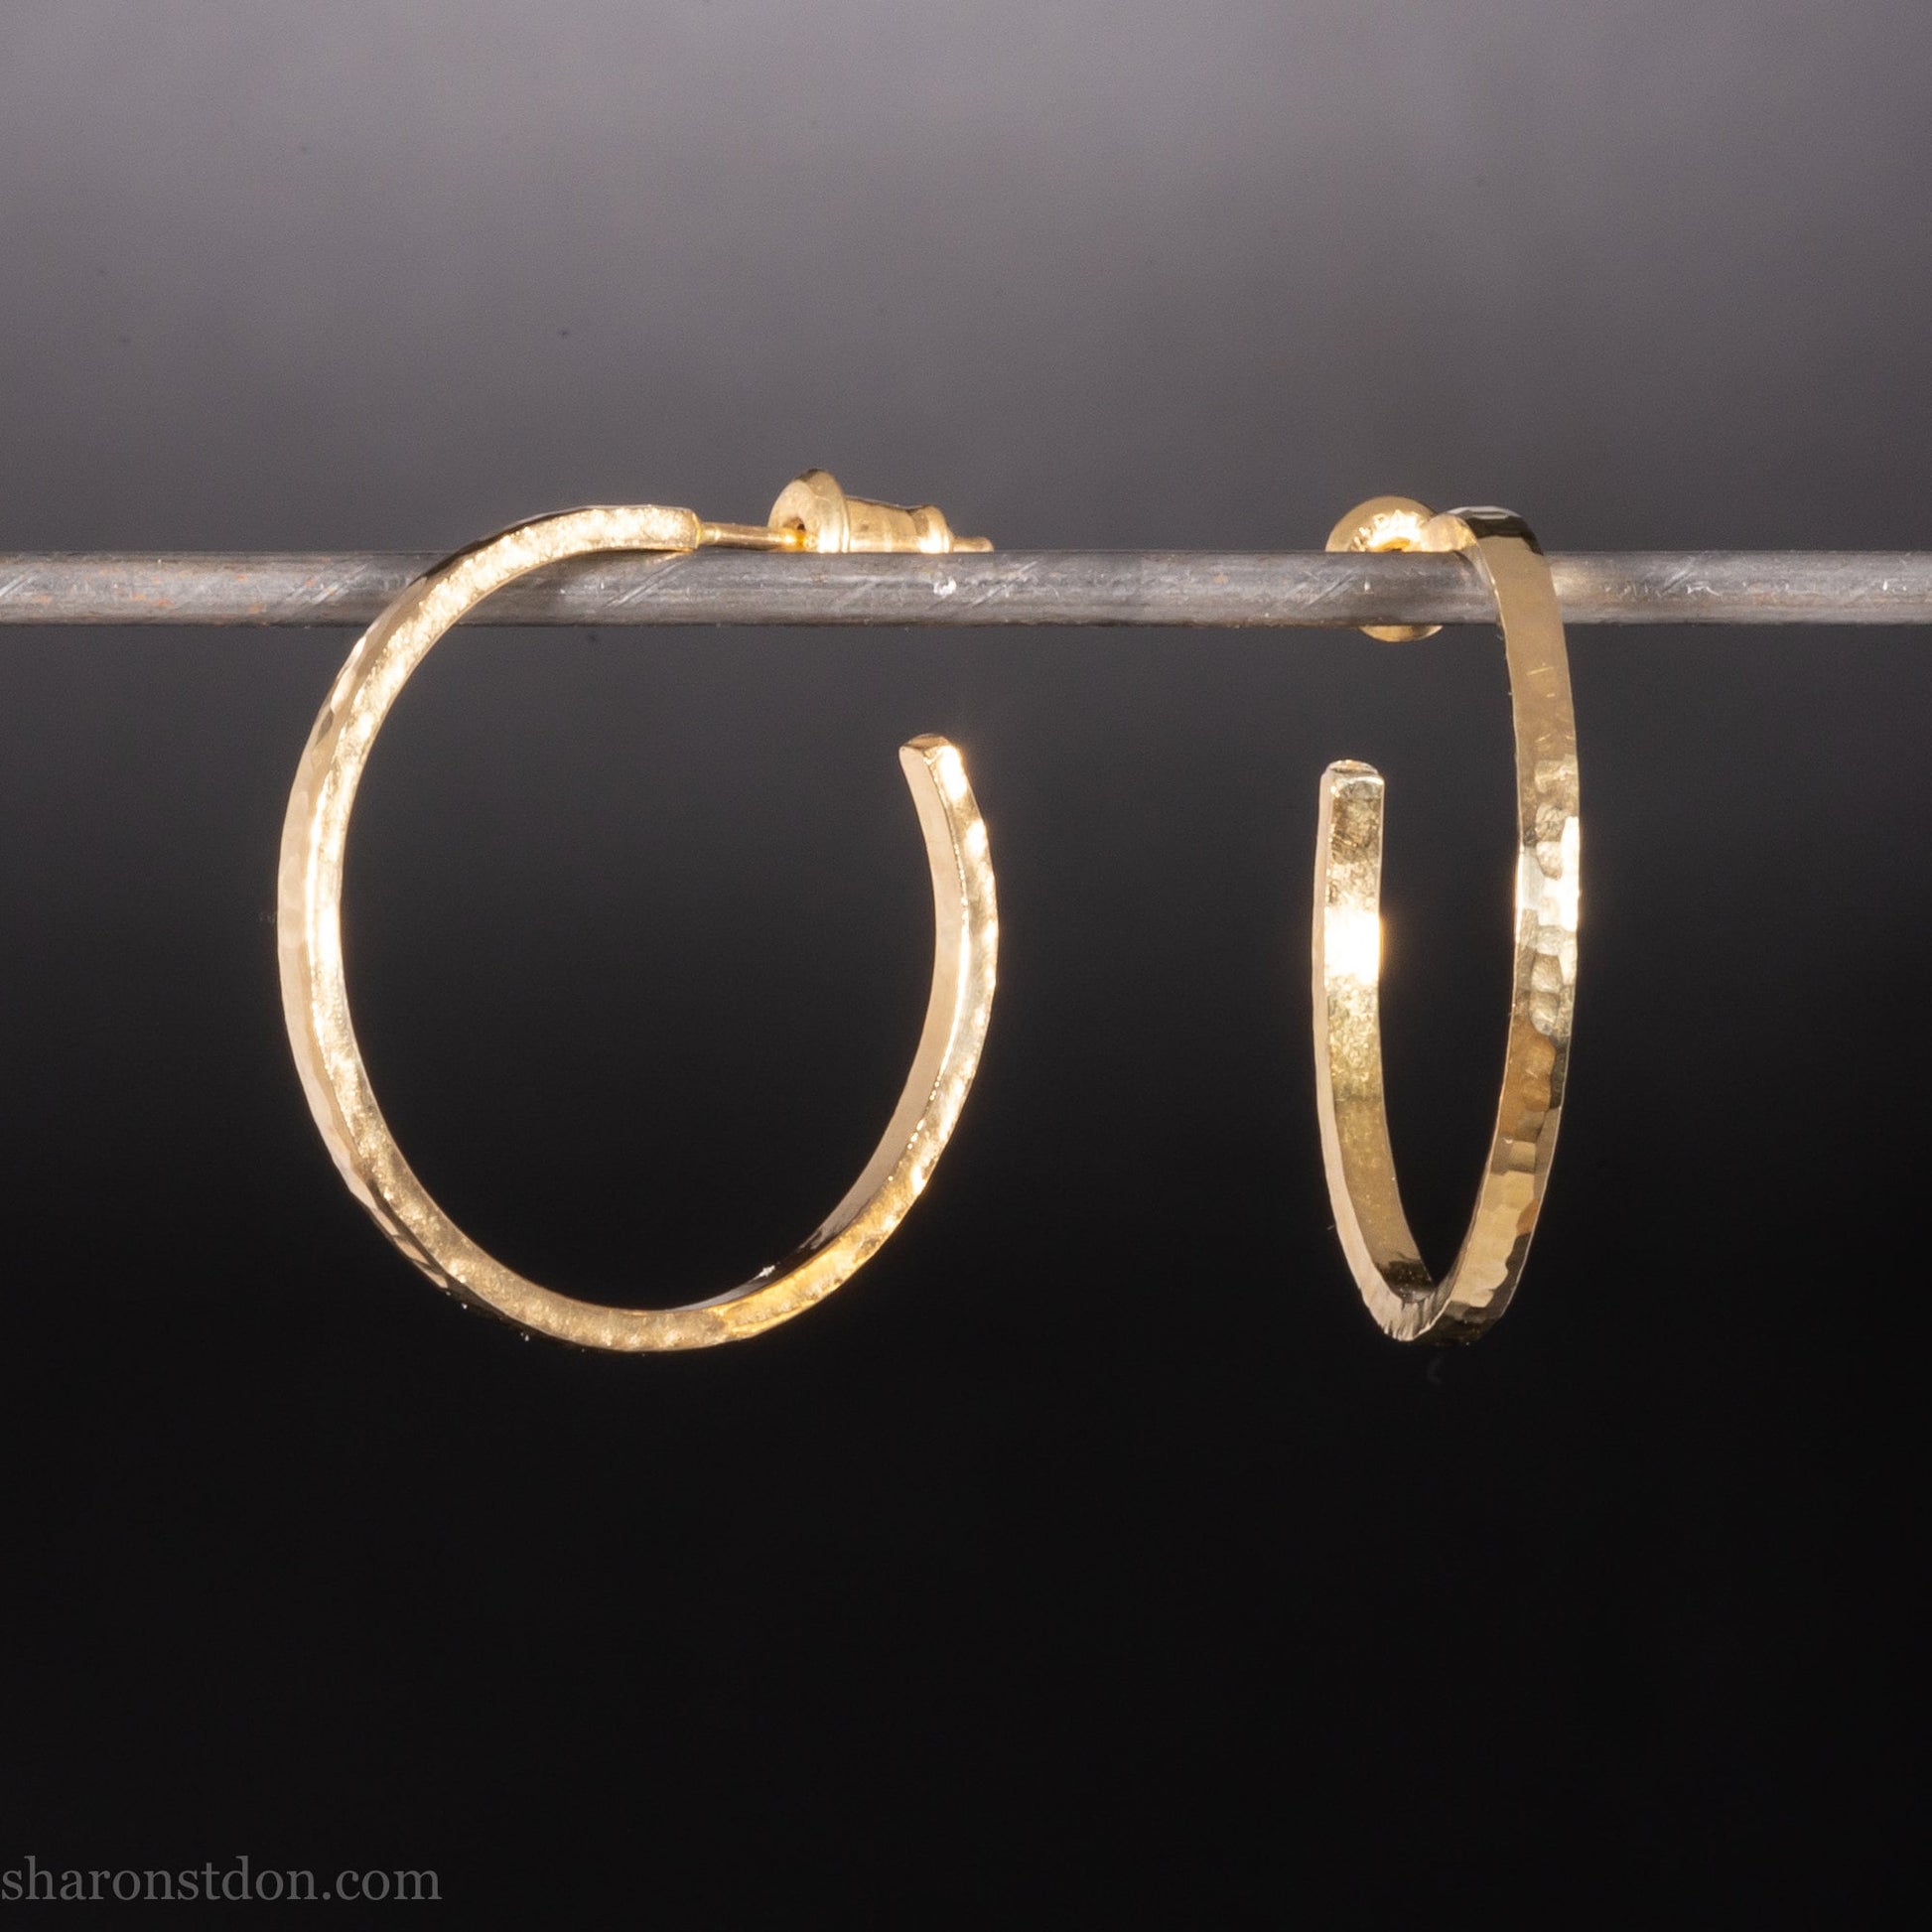 25mm diameter by 1.5mm thick handmade solid 14k yellow gold hoop earrings with solid 14k gold posts and backs. Handmade by Sharon SaintDon in North America. Hammered from solid gold with a matte finish.